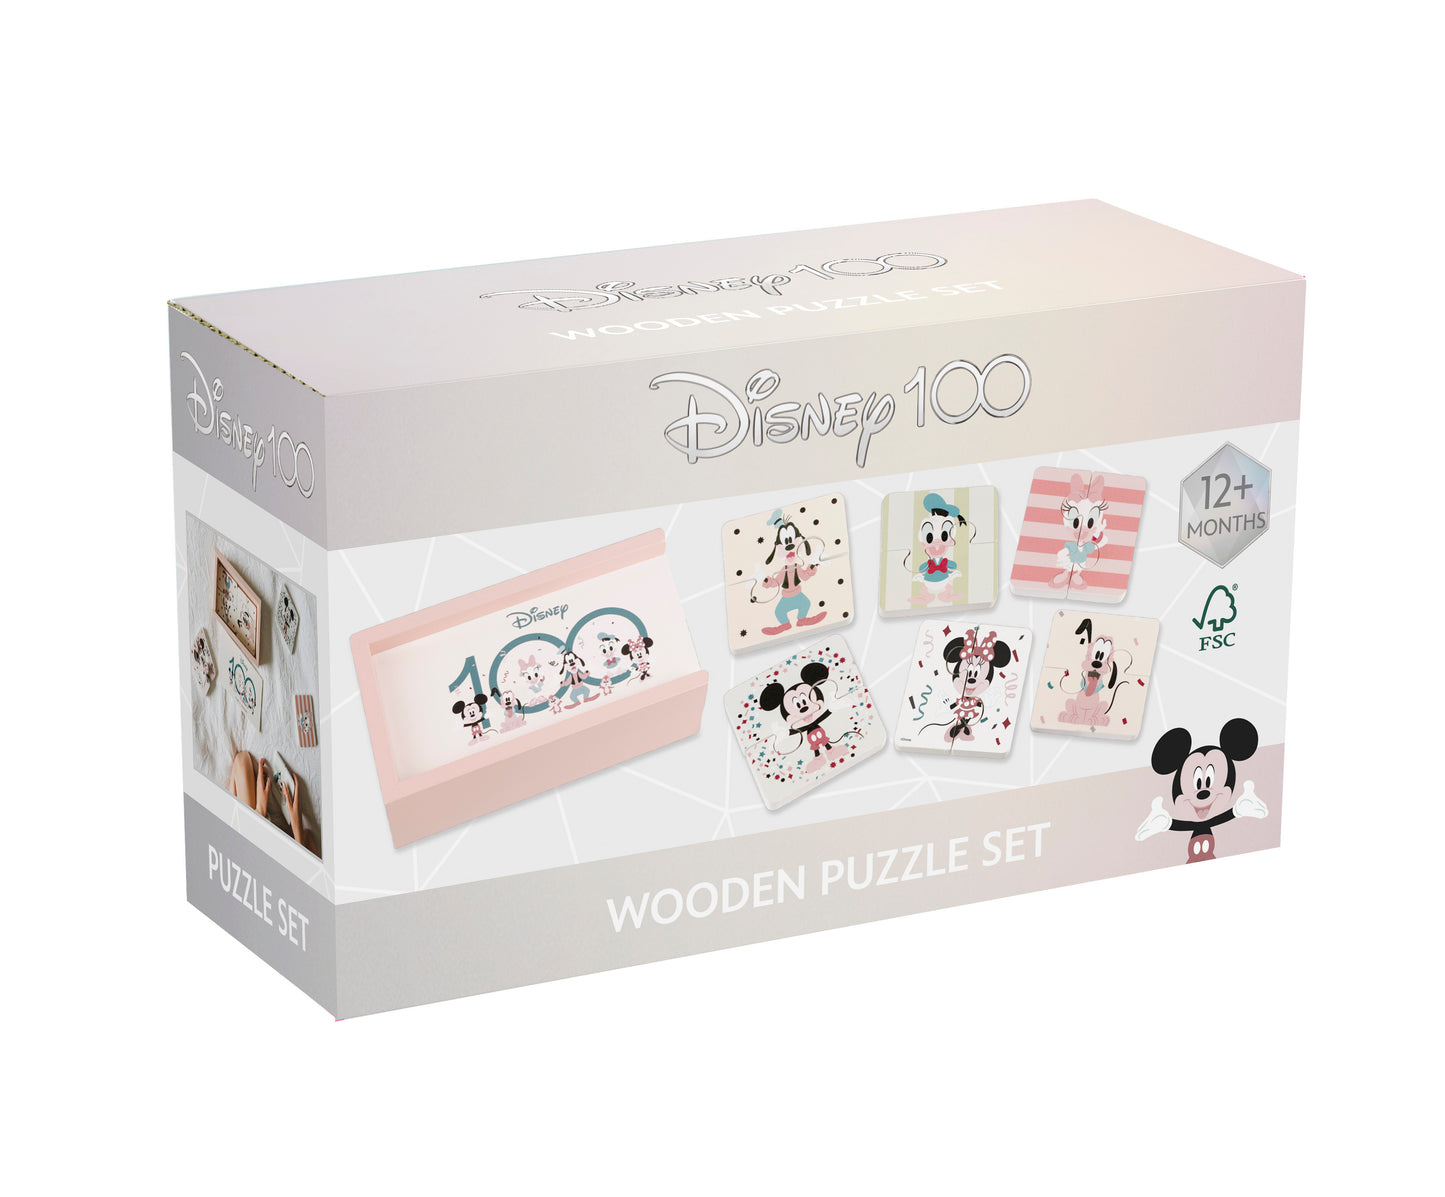 Disney 100 Wooden Puzzles in a Box